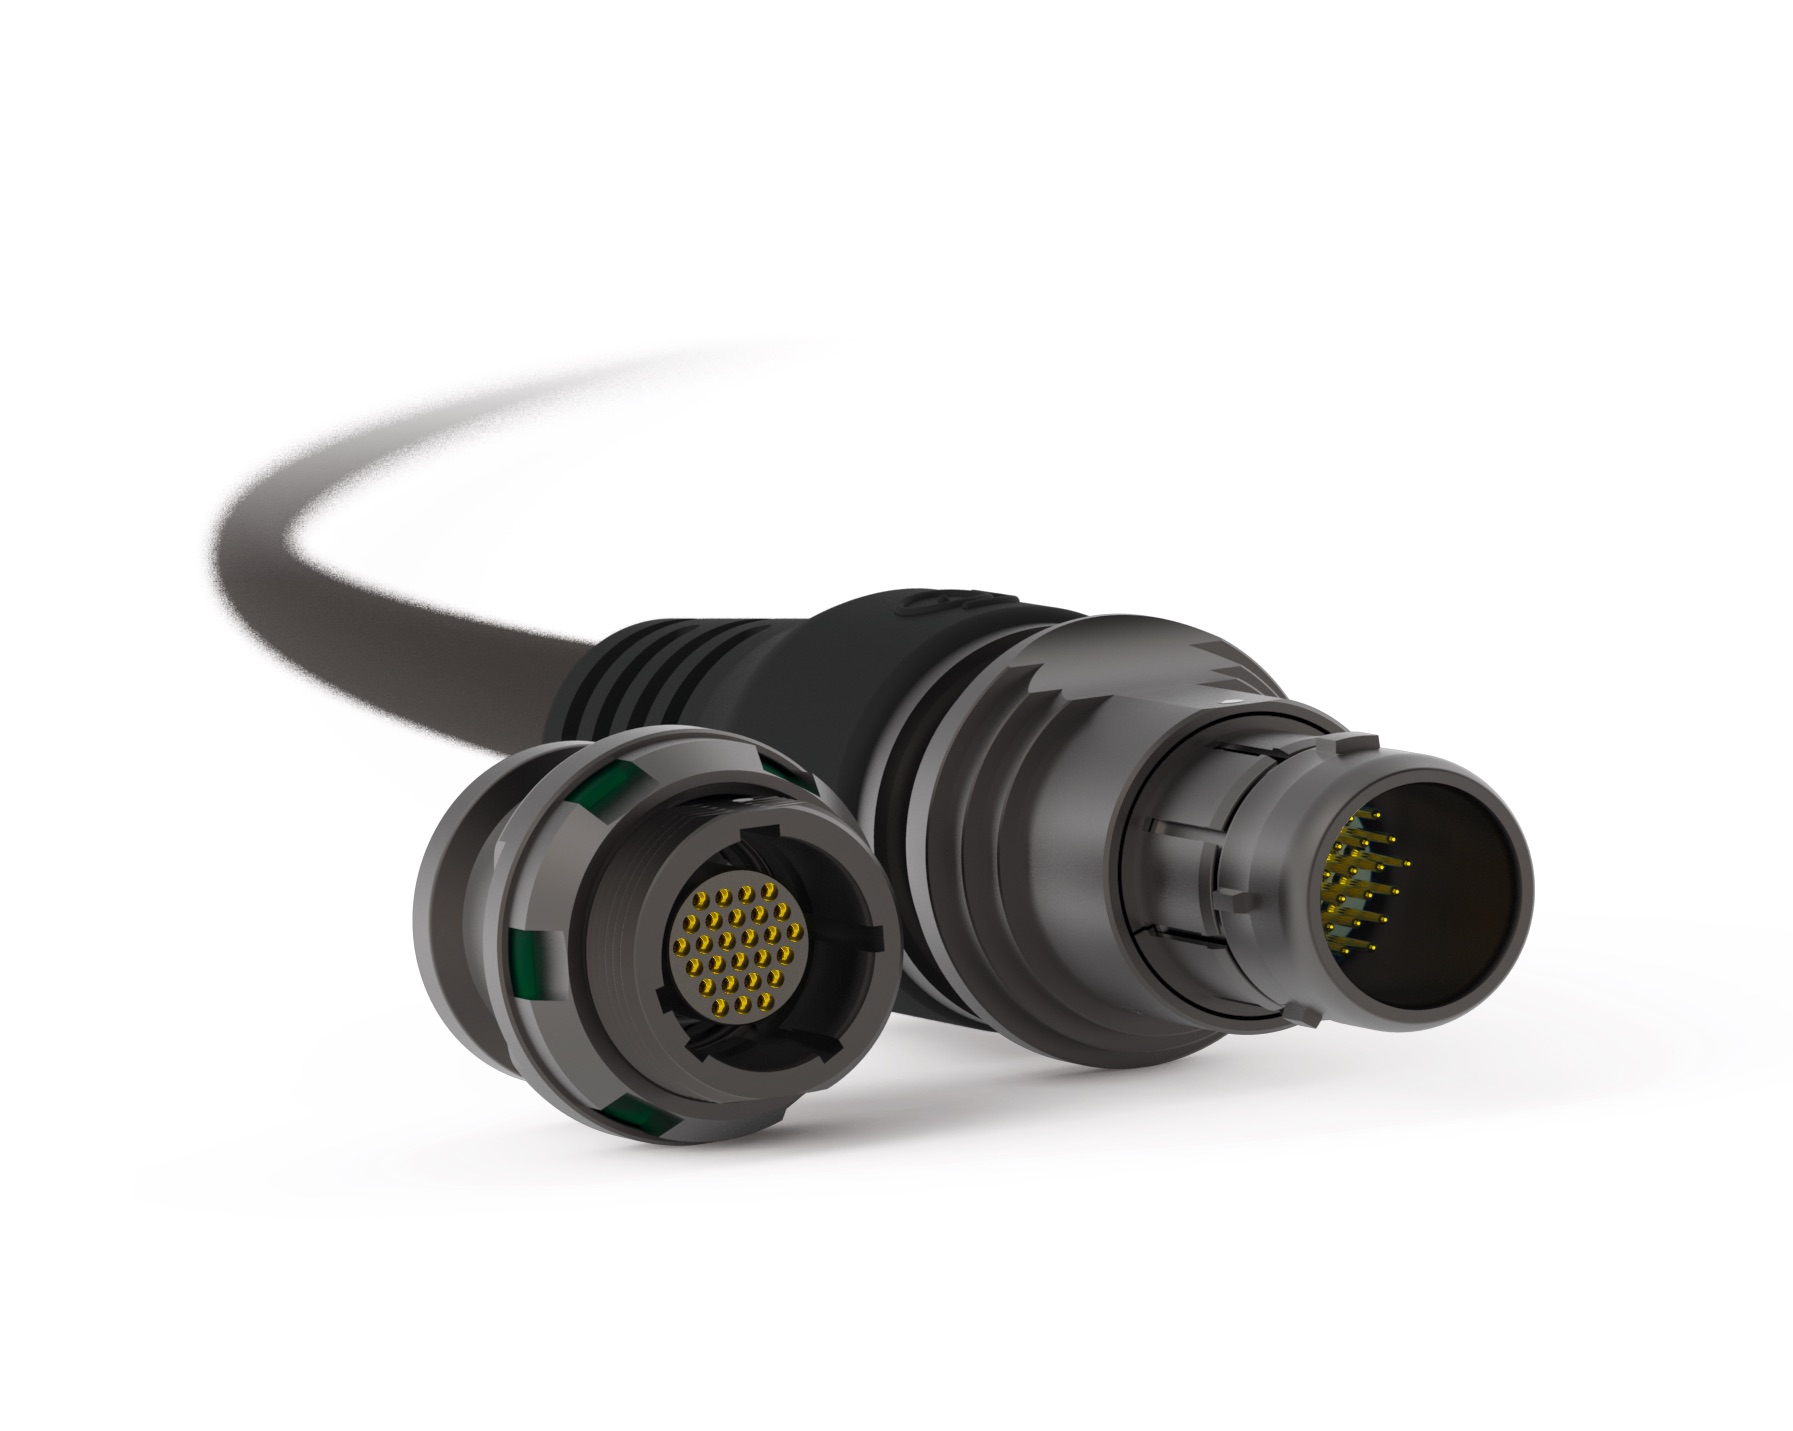 Waterproof Connector and Cable Products: Fischer Connectors’ UltiMate™ Series 